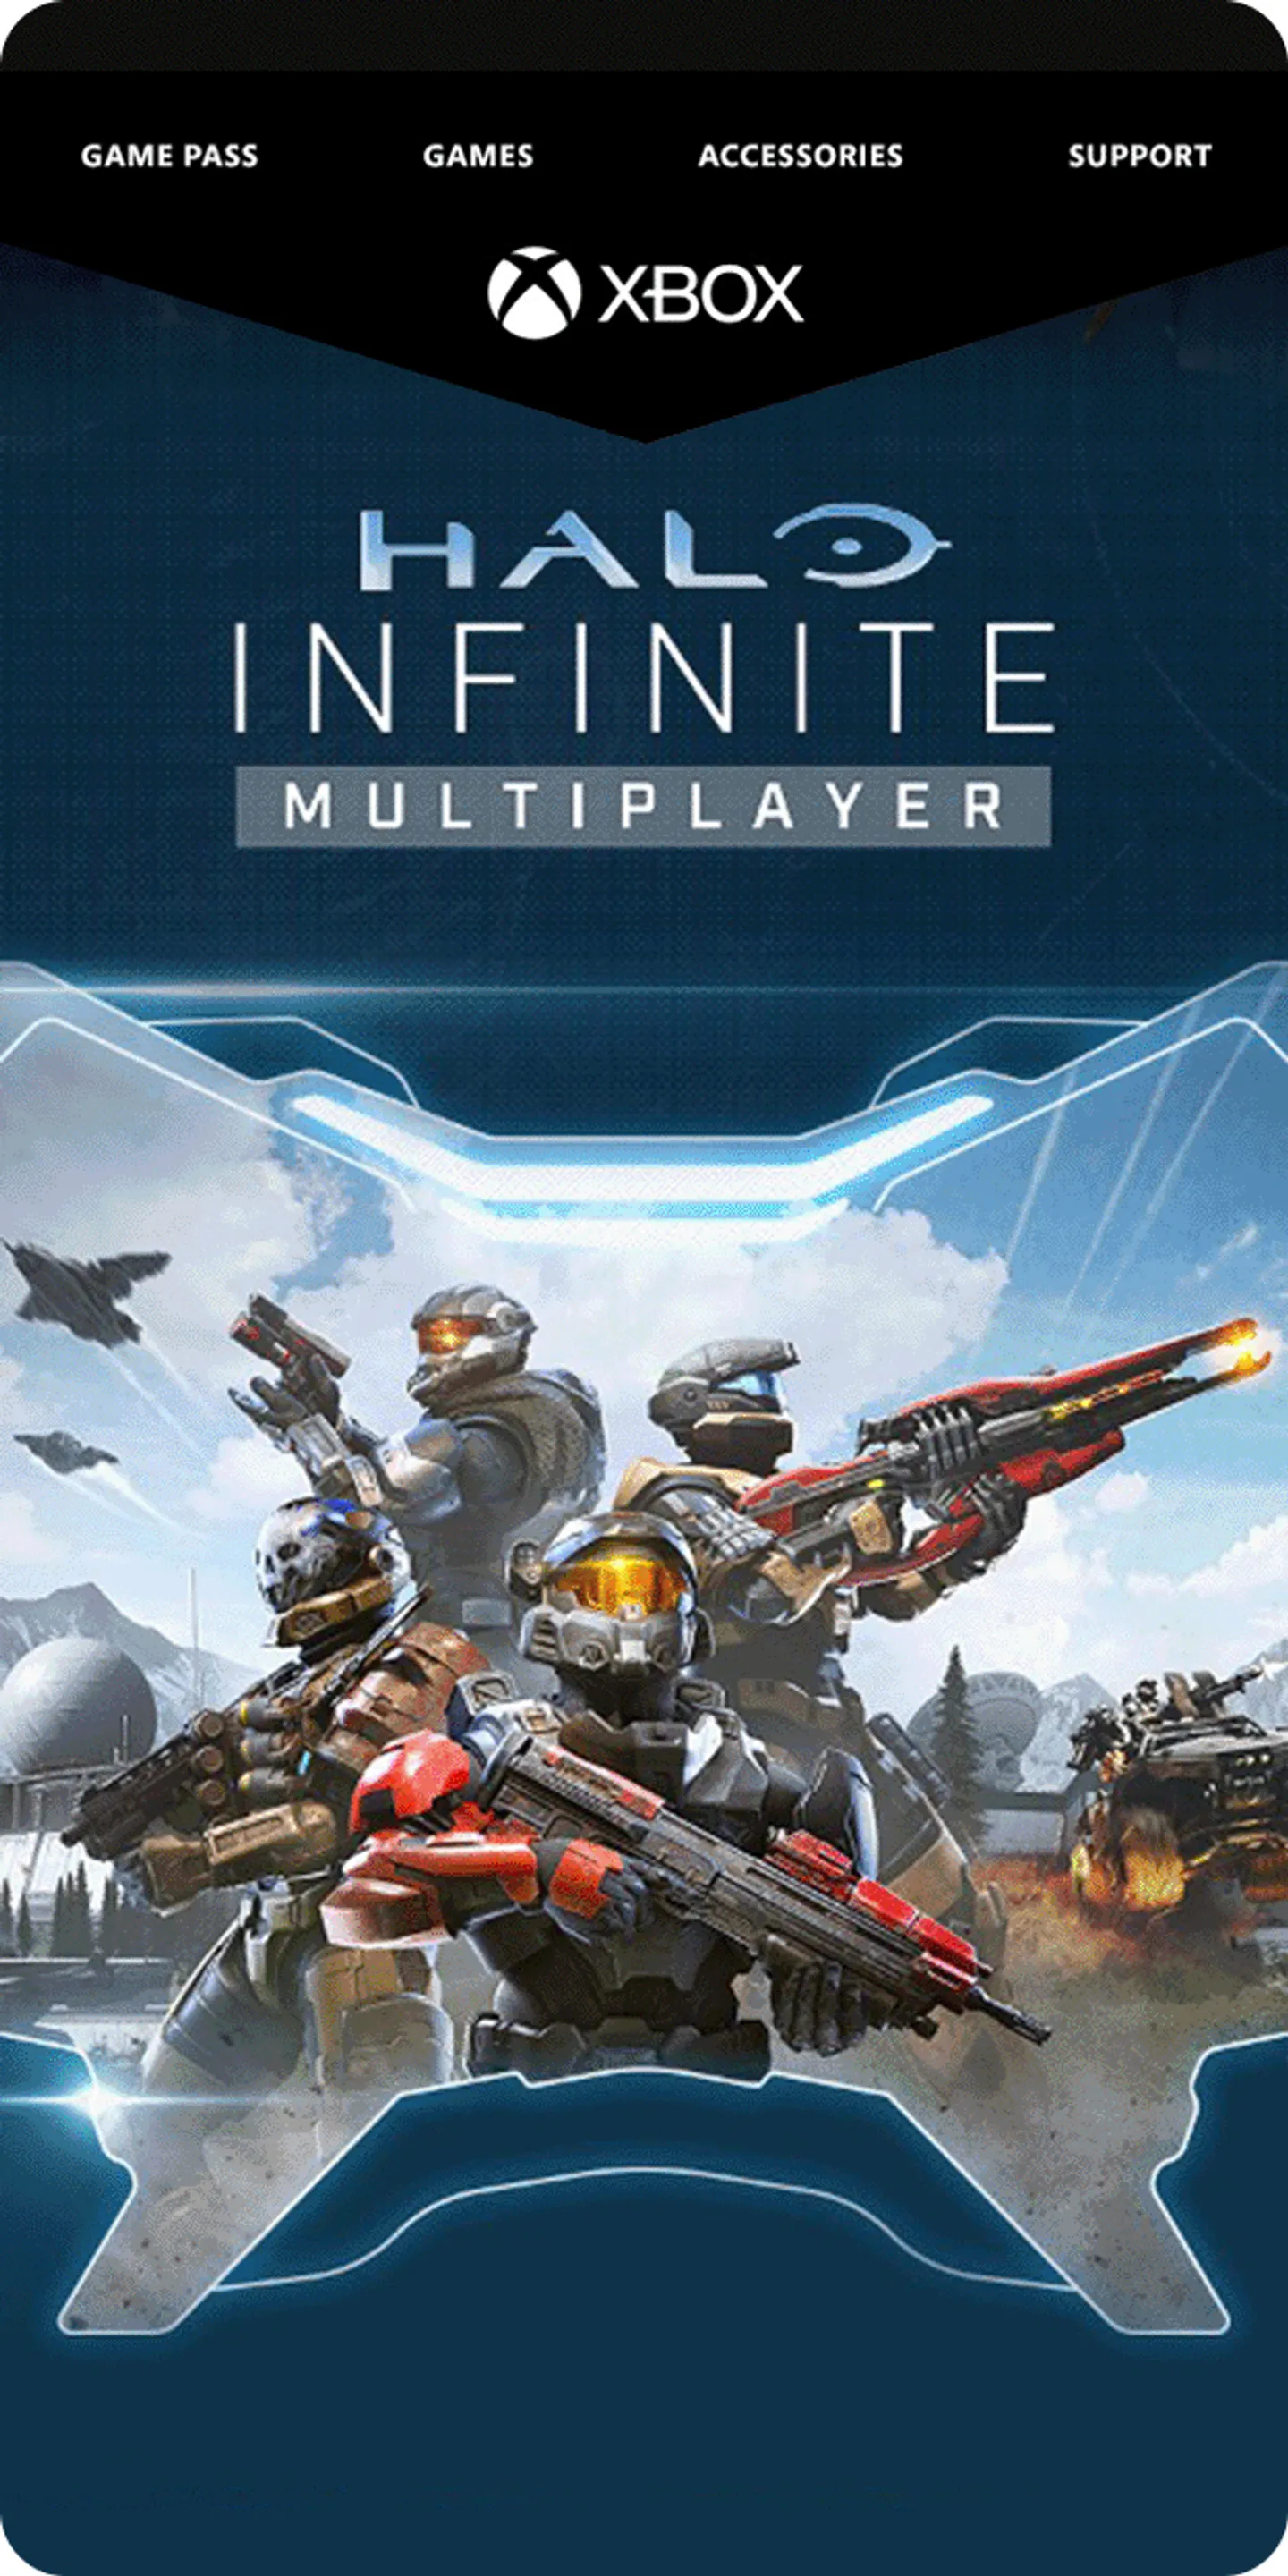 Mobile email featuring Halo Infinite art